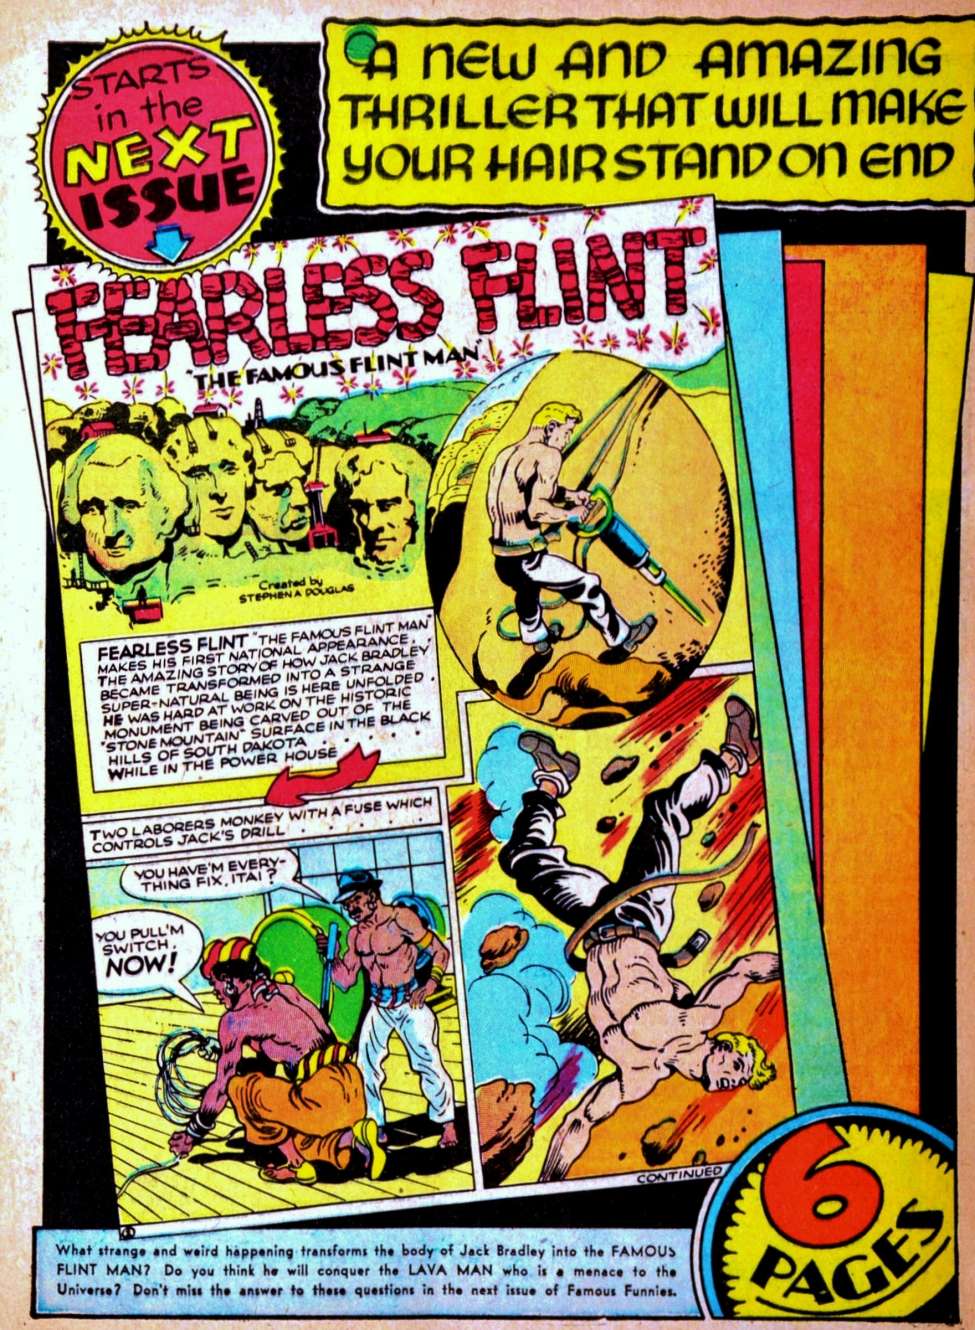 Comic Book Cover For Fearless Flint The Famous Flint Man - Archives 1 of 3